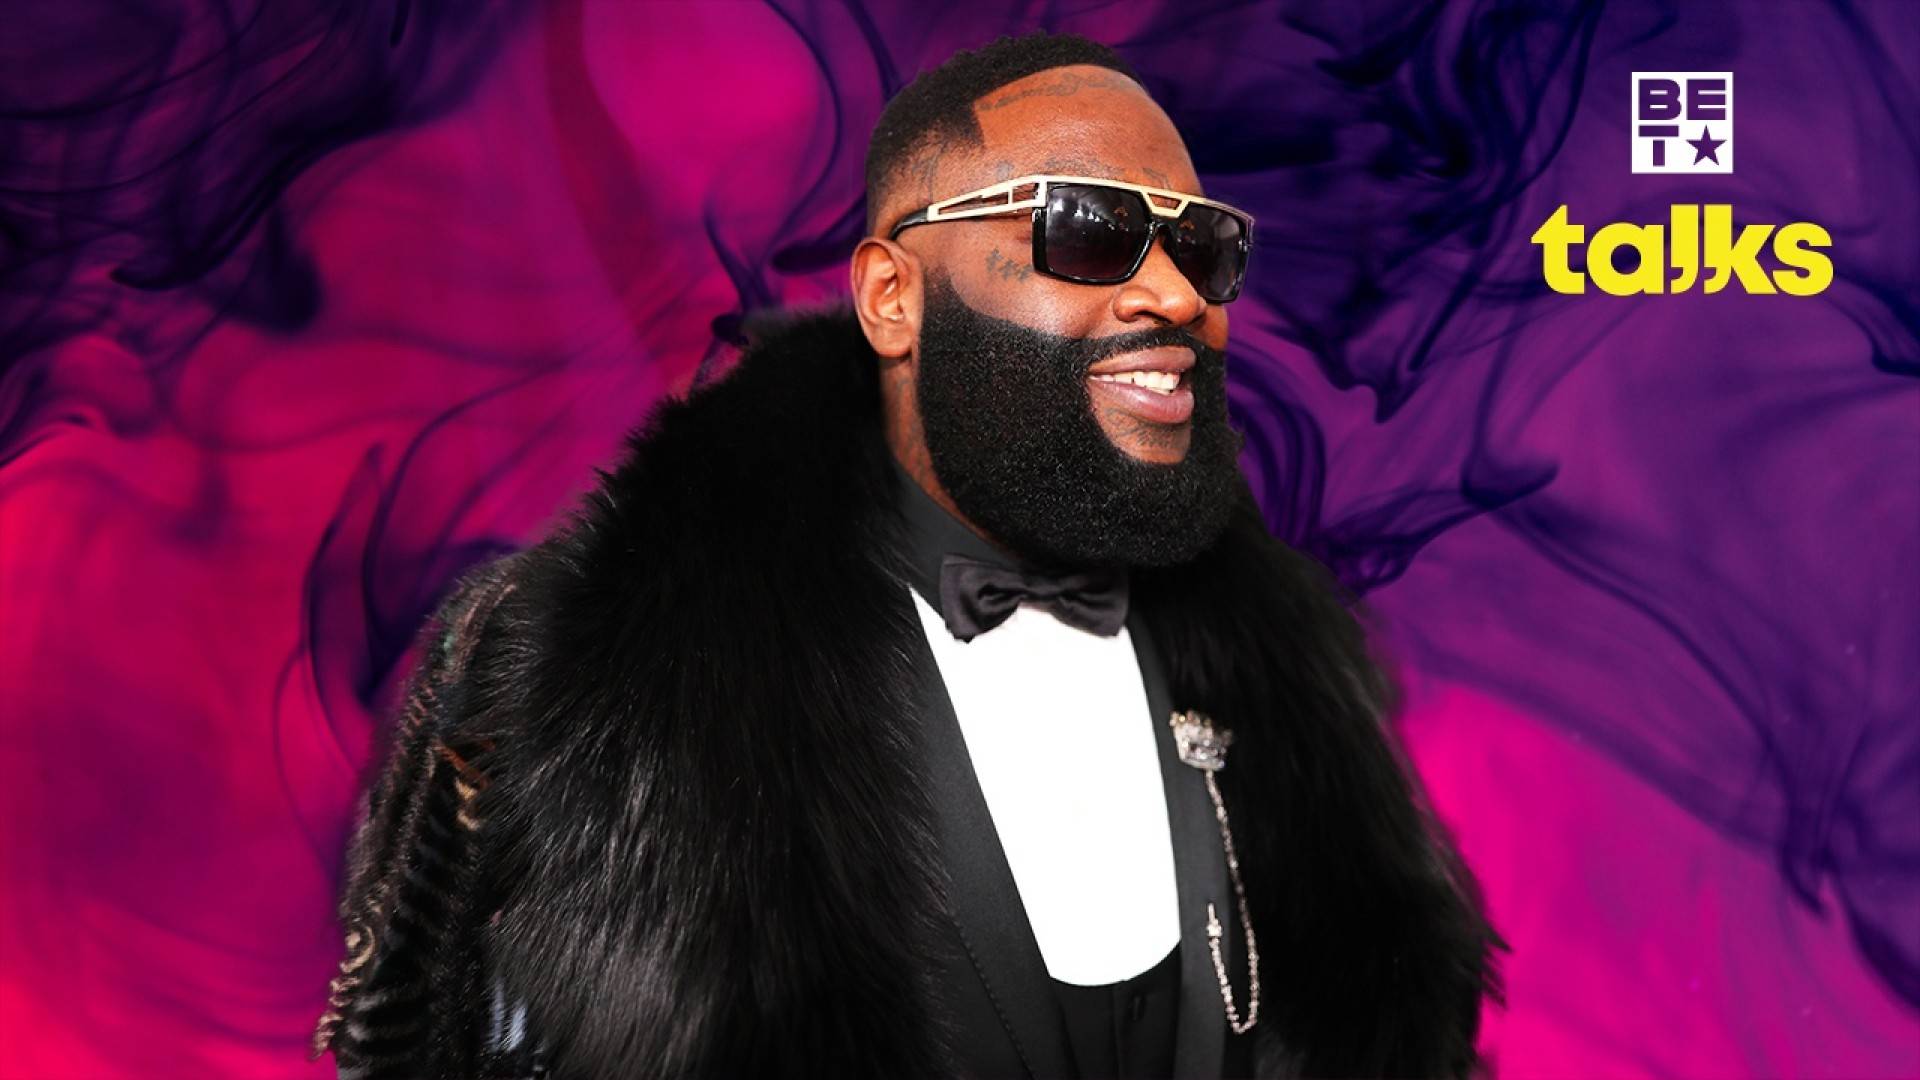 Boss Rick Ross Watch at the 2023 Grammy Awards - Superwatchman.co